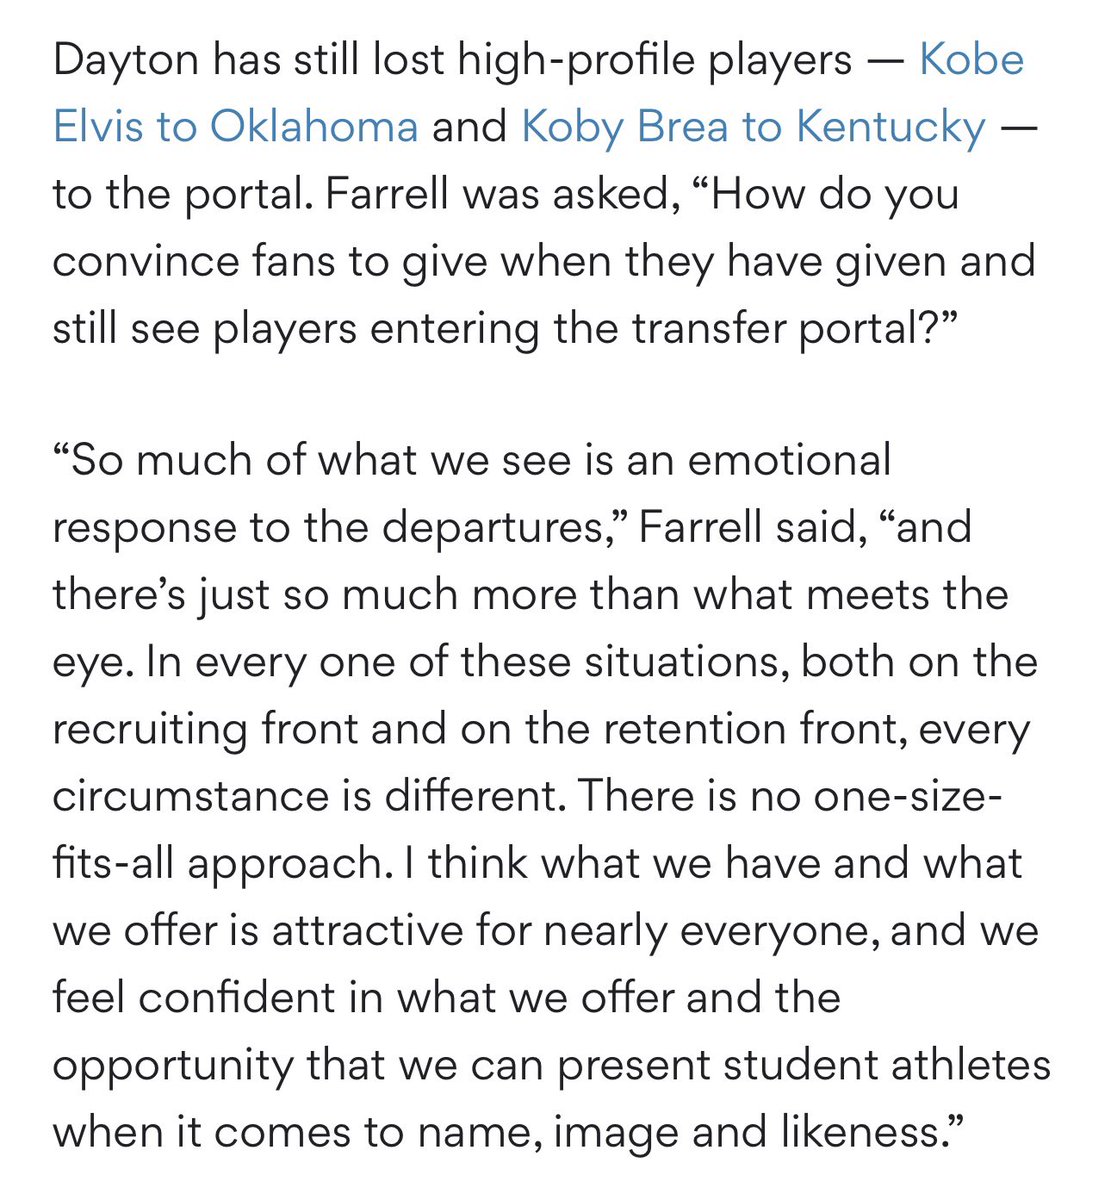 This article takes a good look at Dayton’s #NIL collective. It shows how important collectives now are to recruiting, after the NCAA’s NIL-recruiting rules were enjoined in the Tennessee lawsuit. The importance of having adequate NIL funding is also noted.